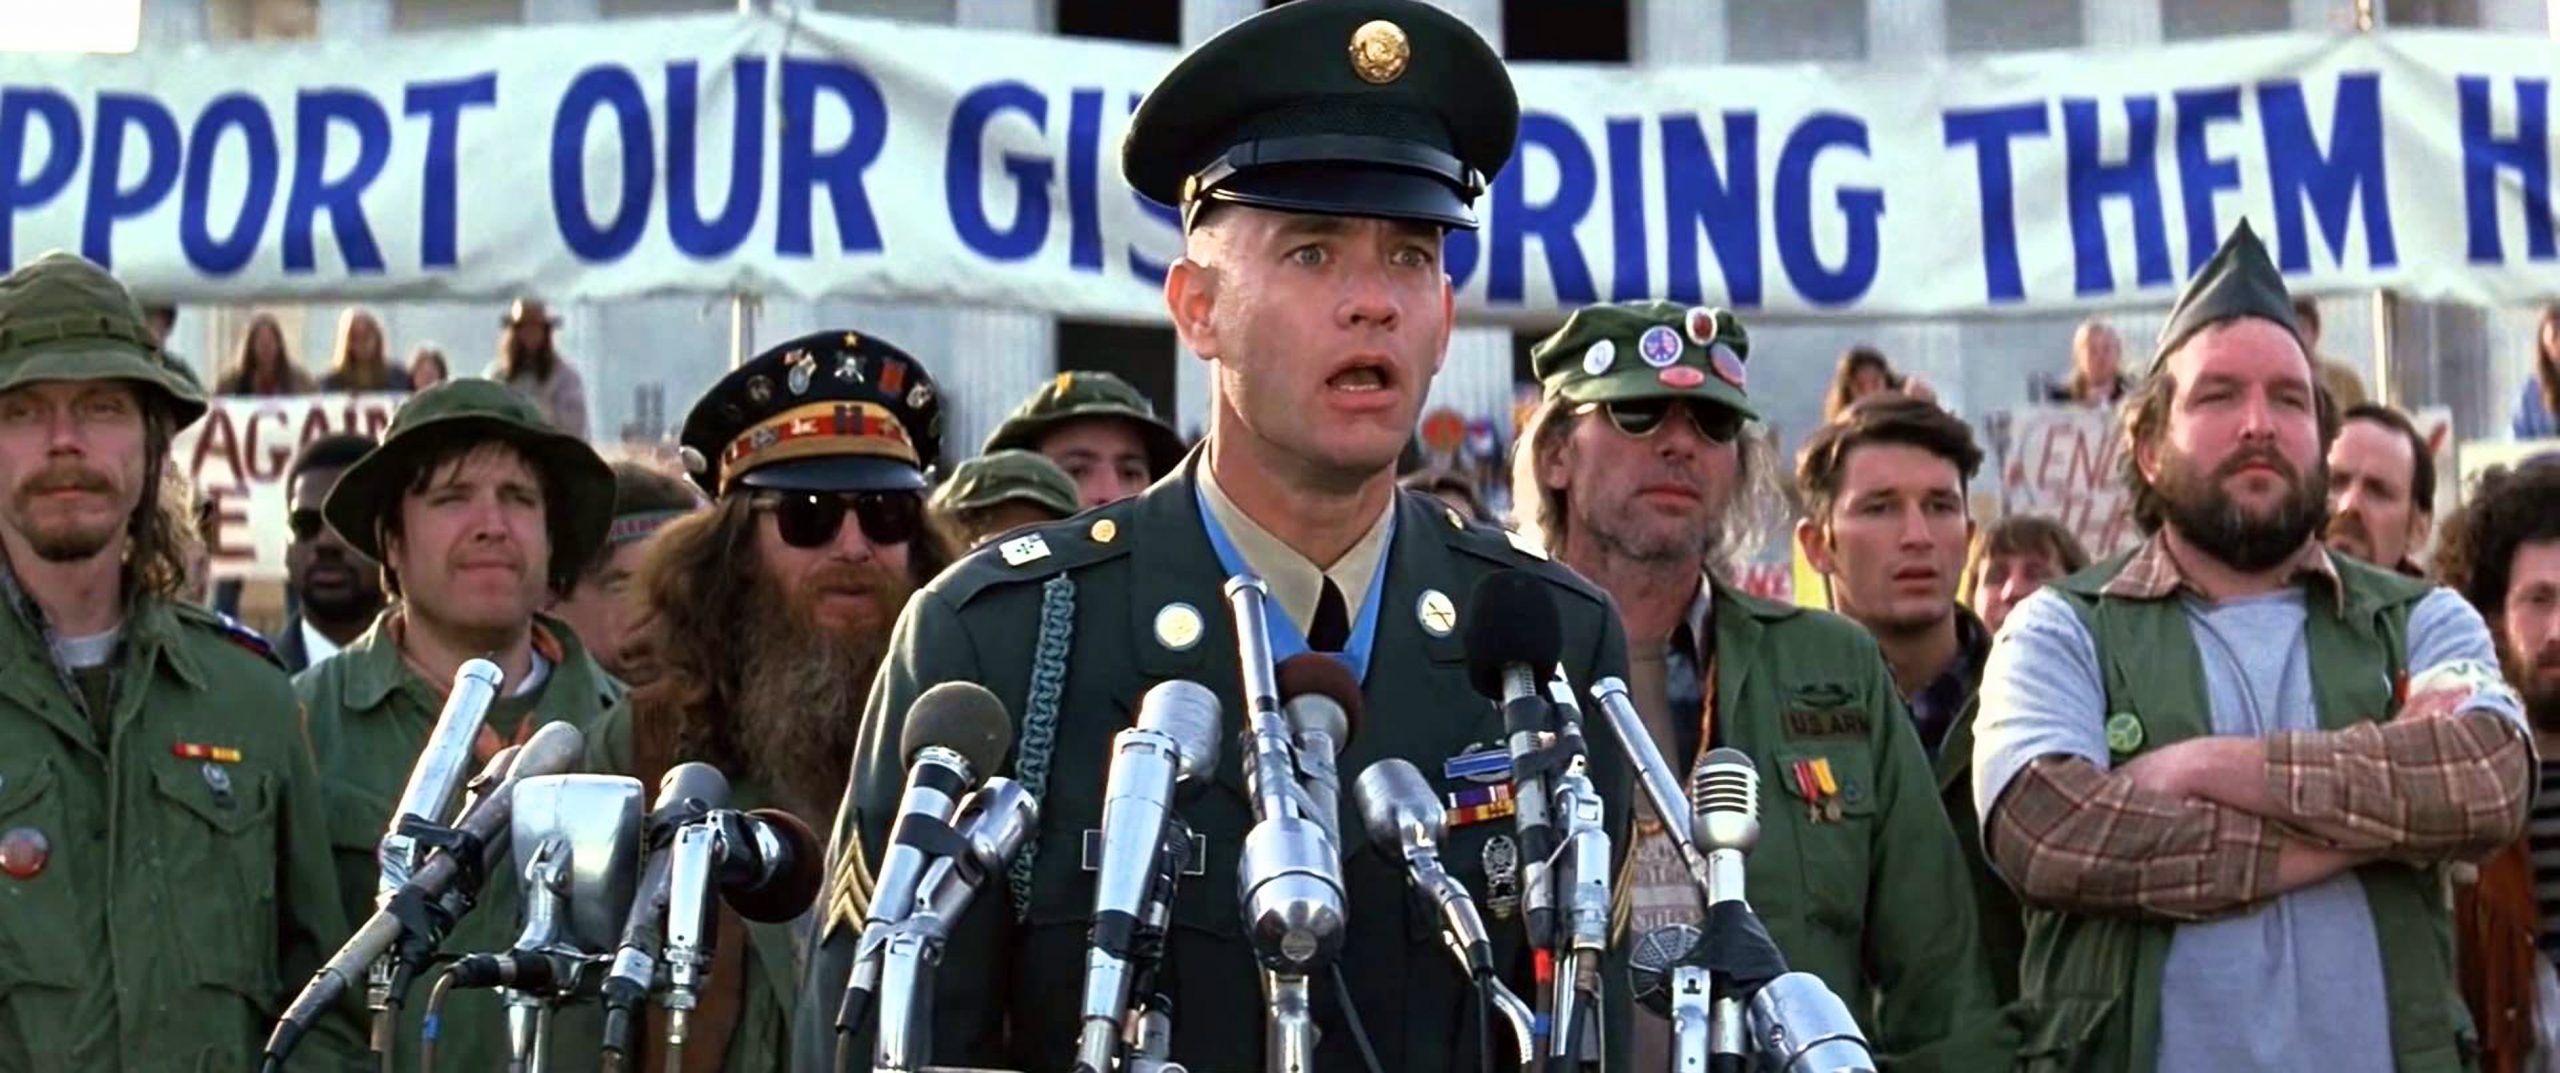 Tom Hanks peers into the crowd in a scene from Forrest Gump